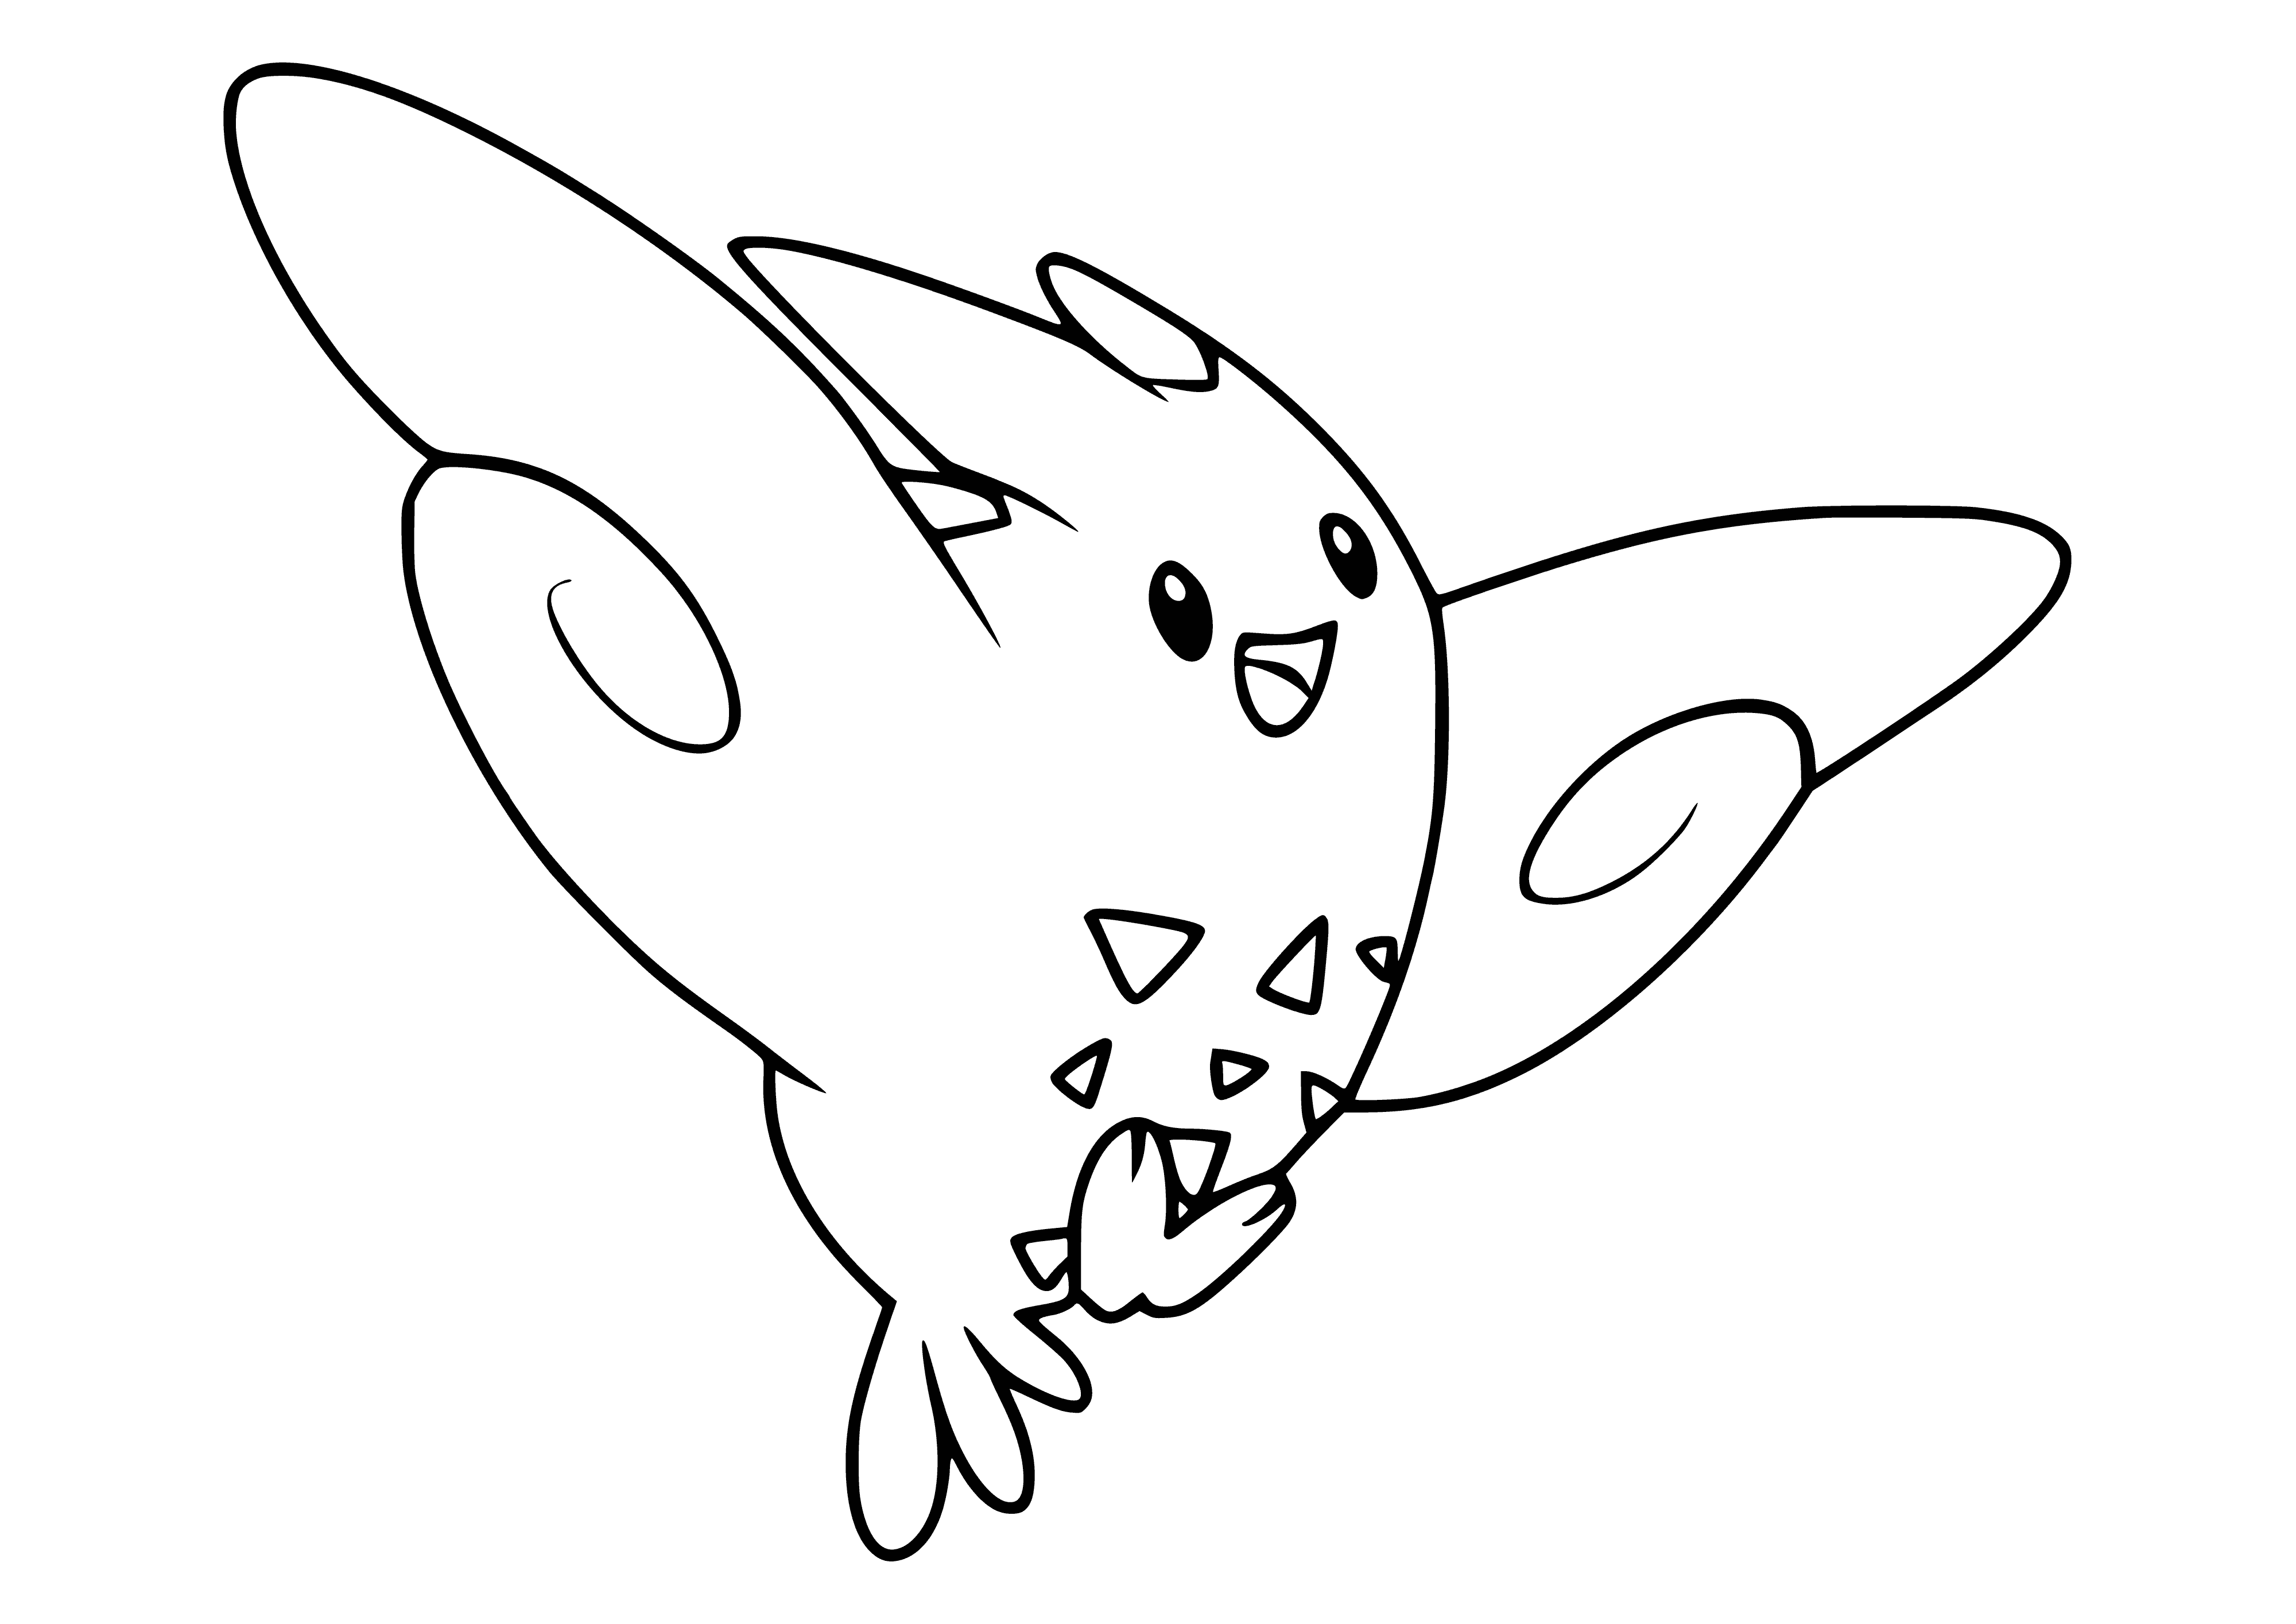 Pokemon Togekiss (Togekiss) coloring page